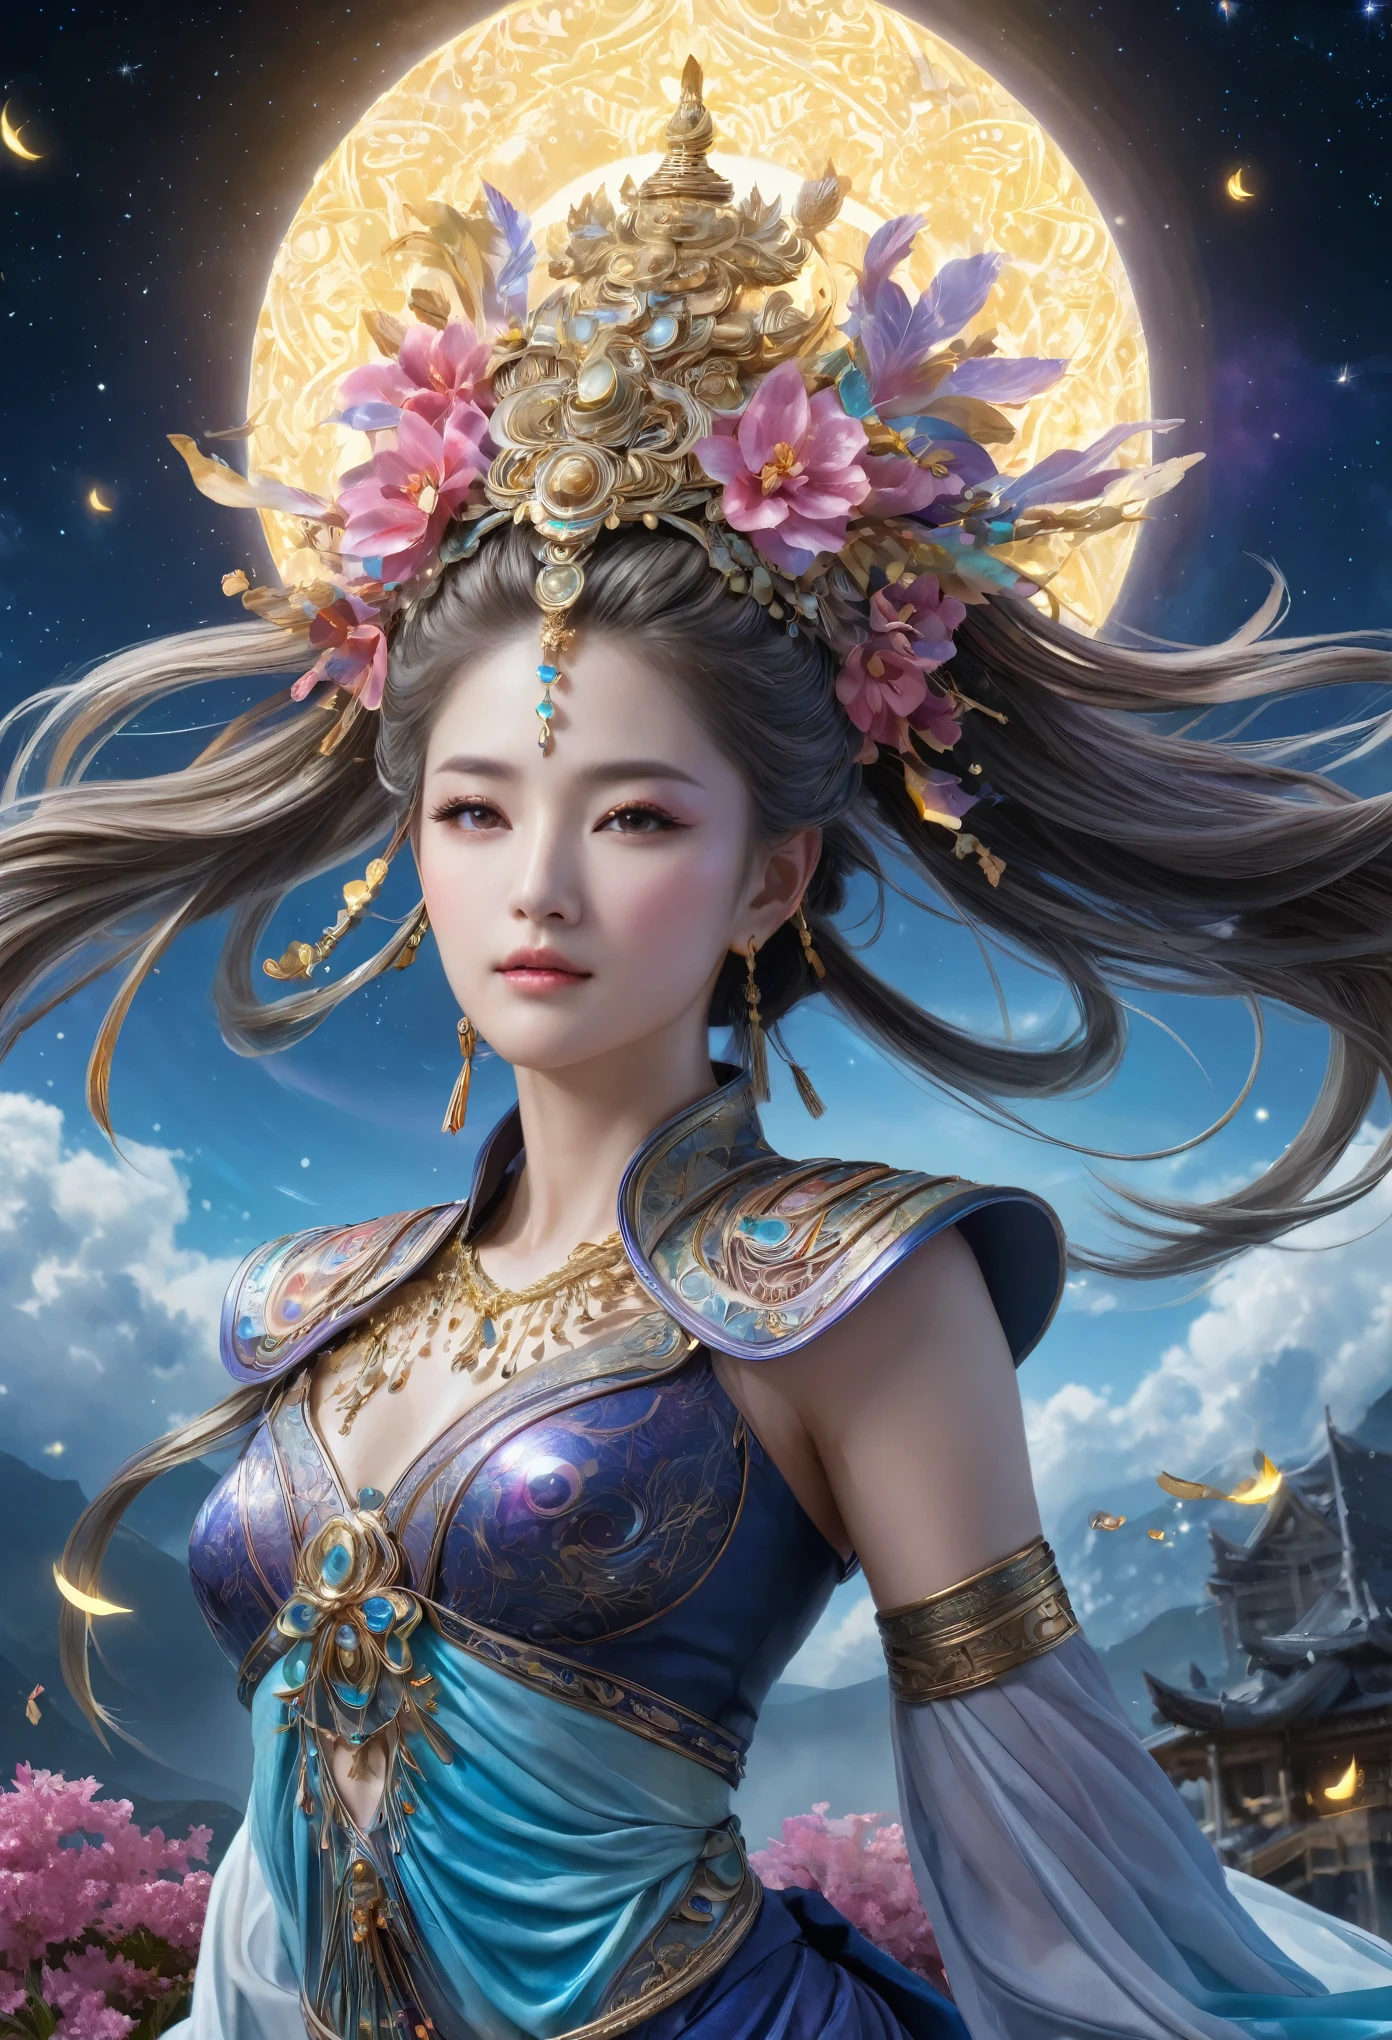 8K resolution, masterpiece, Highest quality, Award-winning works, unrealistic, Final Fantasy, Royal Jewel,Photorealistic Painting by Midjourney and Greg Rutkowski, , elegant, Very detailed, Delicate depiction of hair, Miniature Painting, Digital Painting, Art Station, Concept Art, Smooth, Sharp focus, shape, nature, flight, Thousand Armed Kannon Bodhisattva, Asura, God of War, Castle in the Sky, A strip of light pouring down from the sky, A pillar of light stretching into the sky, Complex colors, Buddhist Mandala, Colorful magic circle, flash, Mysterious Background, aura, A gentle gaze, break, Small faint lights and flying fireflies, night, Starry Sky, milky way, nebula, shooting star, Flowers, birds, wind and moon, erotic, one sexy lady, healthy shaped body, Anatomically accurate skeleton, 22-year-old woman, Asura, height: 170cm, huge firm bouncing busts, Shiny dress, Iridescent dress